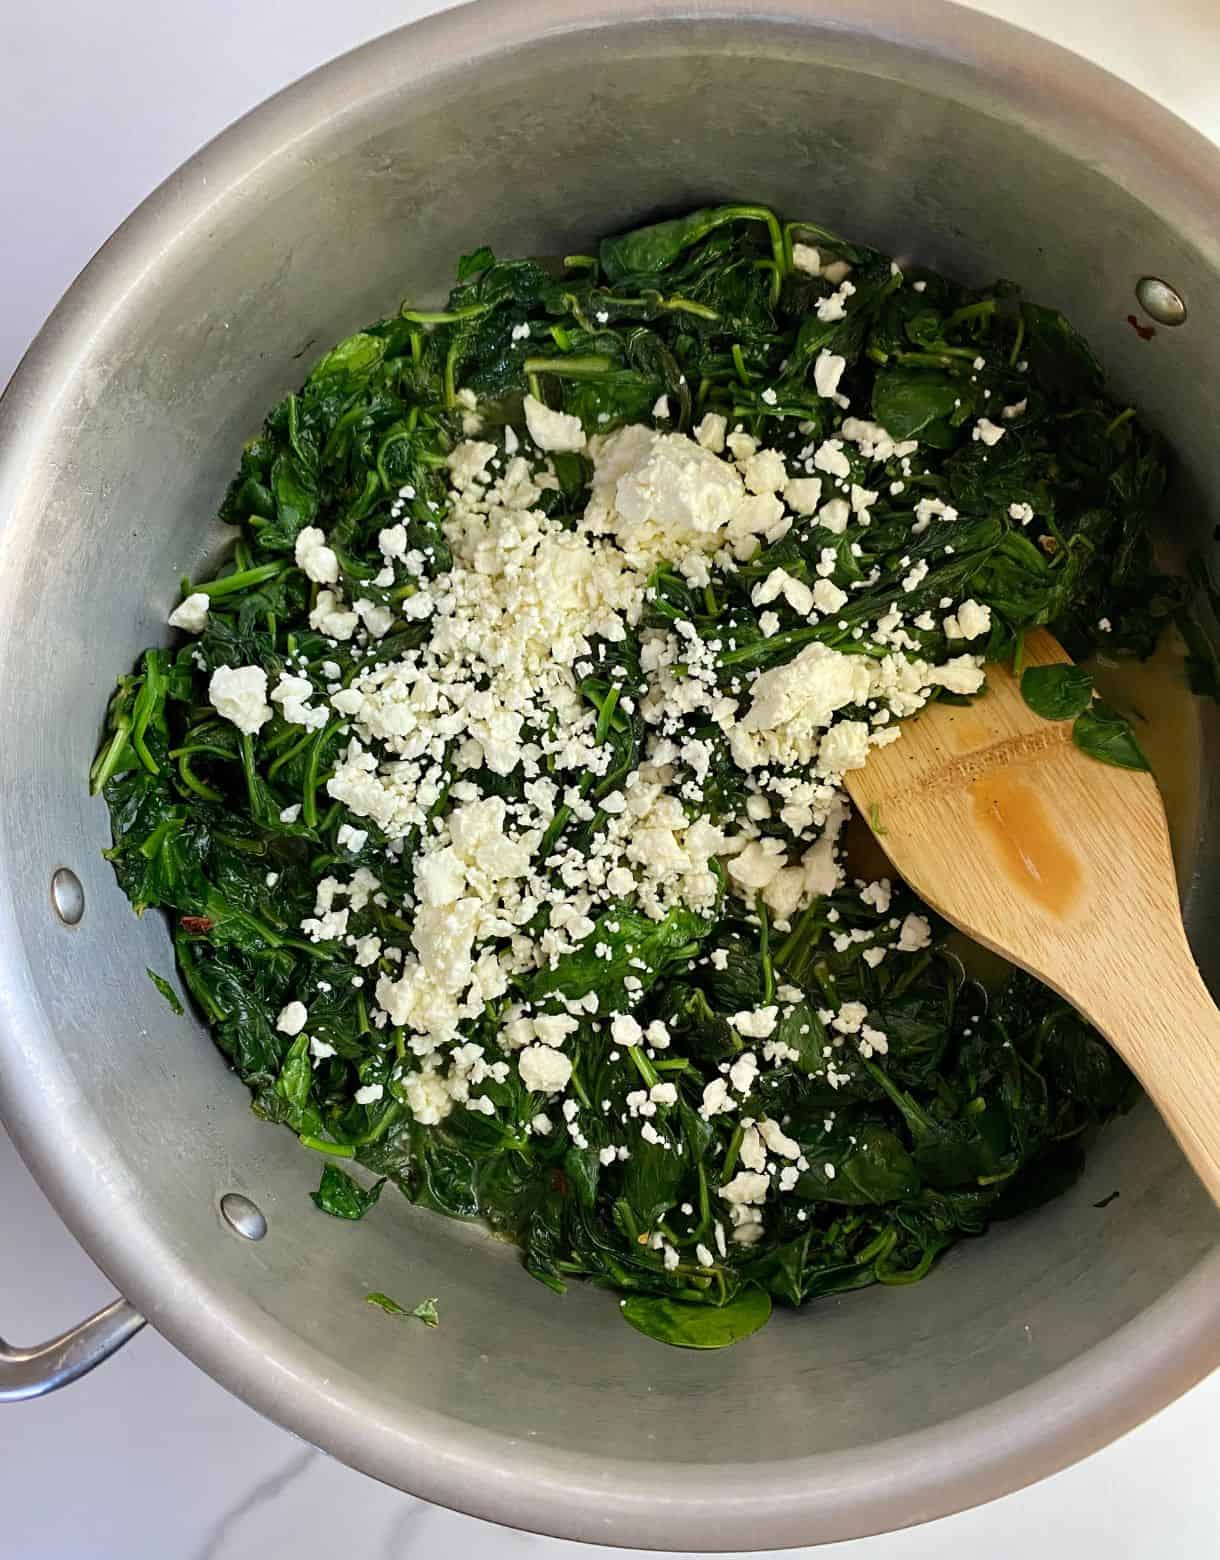 A pan with cooked spinach and feta.